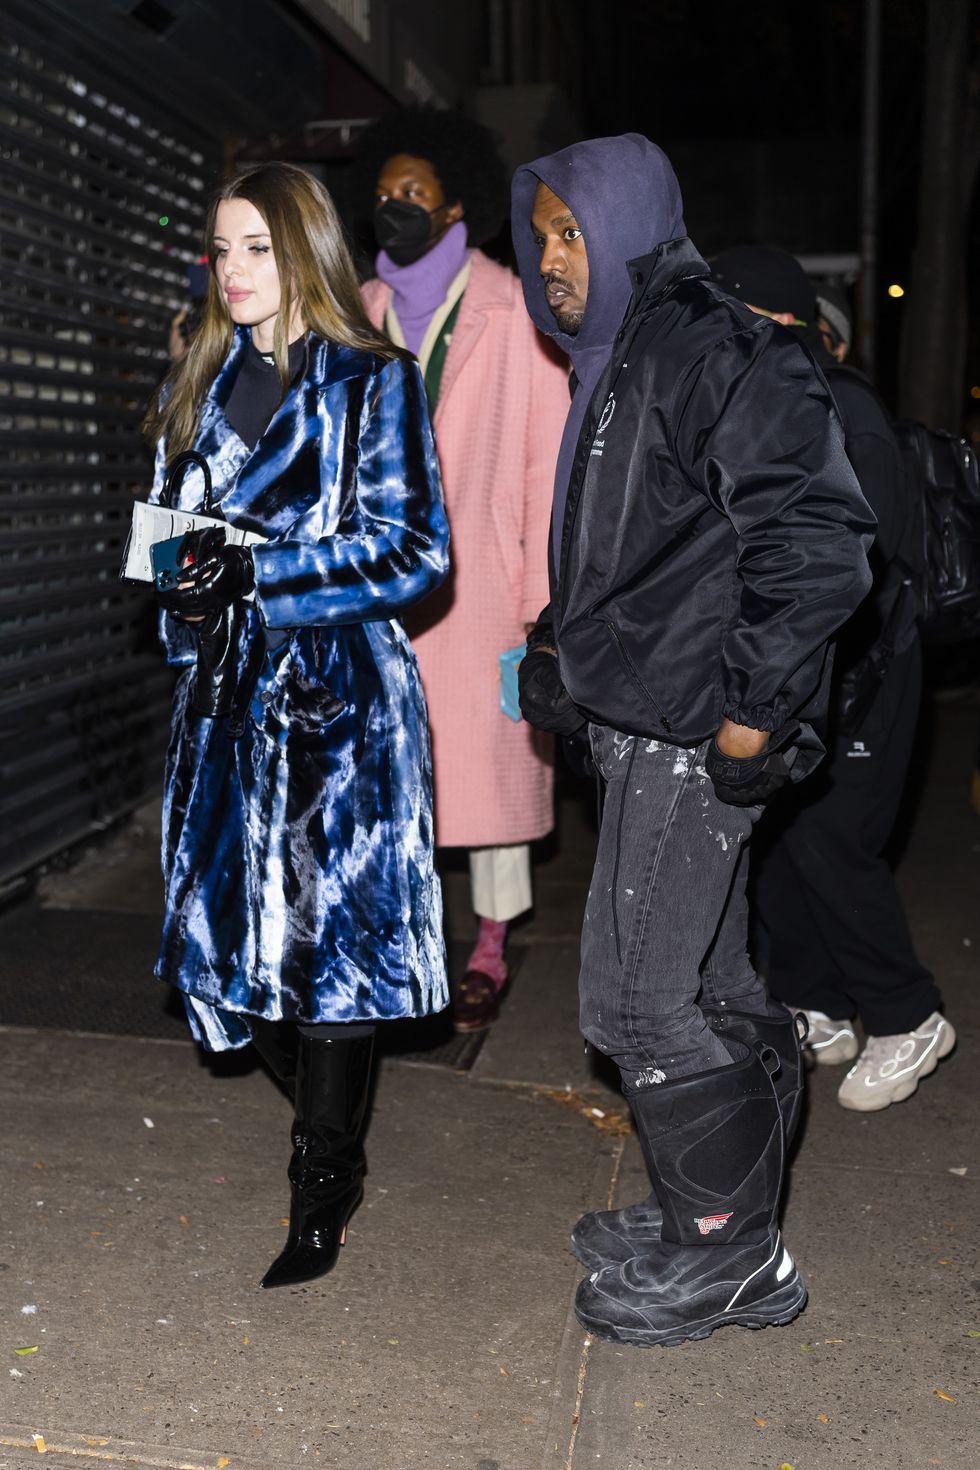 julia fox and kanye west in new york city on january 04, 2022